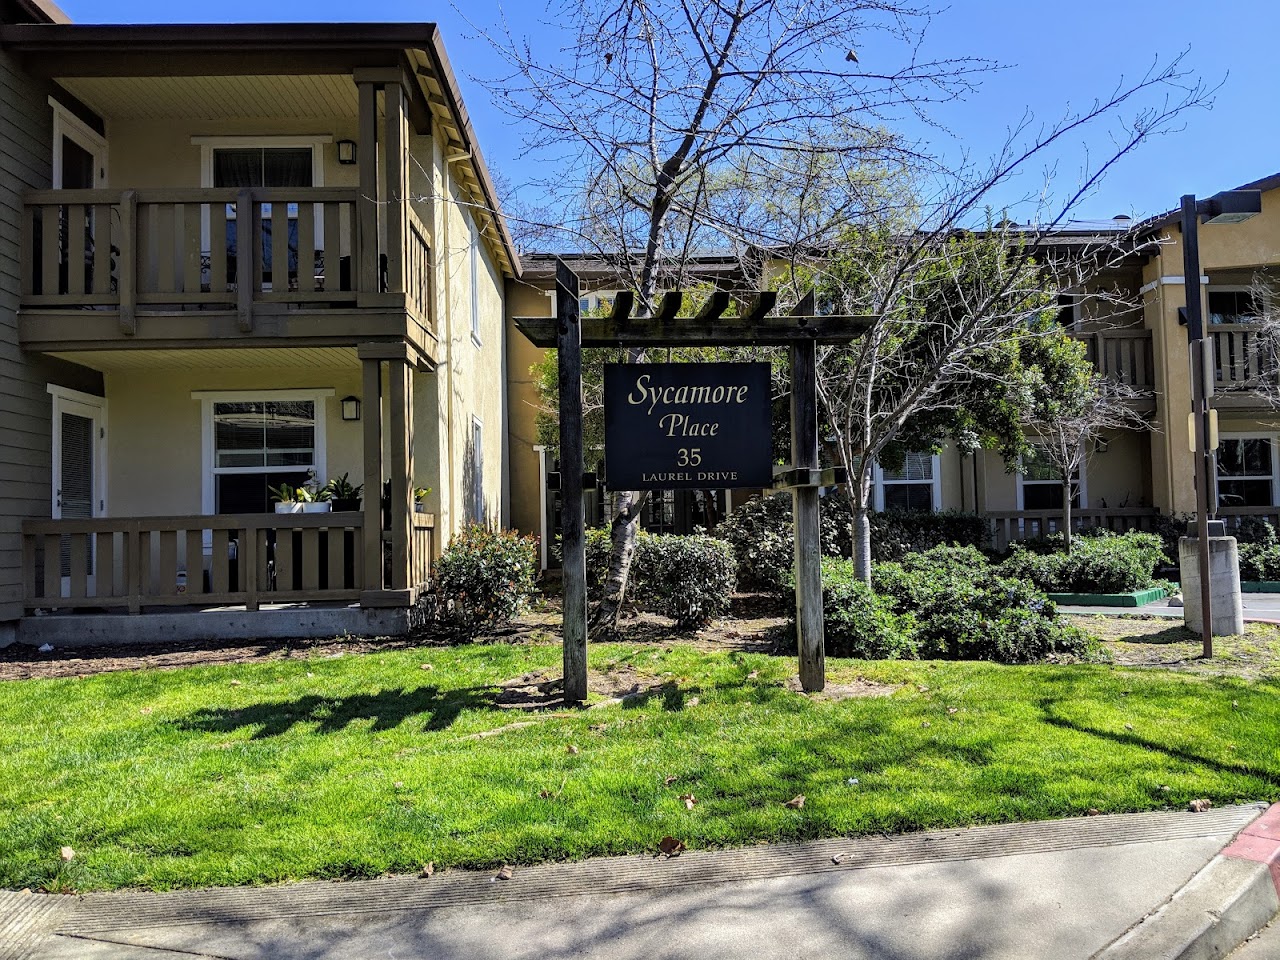 Photo of SYCAMORE PLACE at 35 LAUREL DR DANVILLE, CA 94526